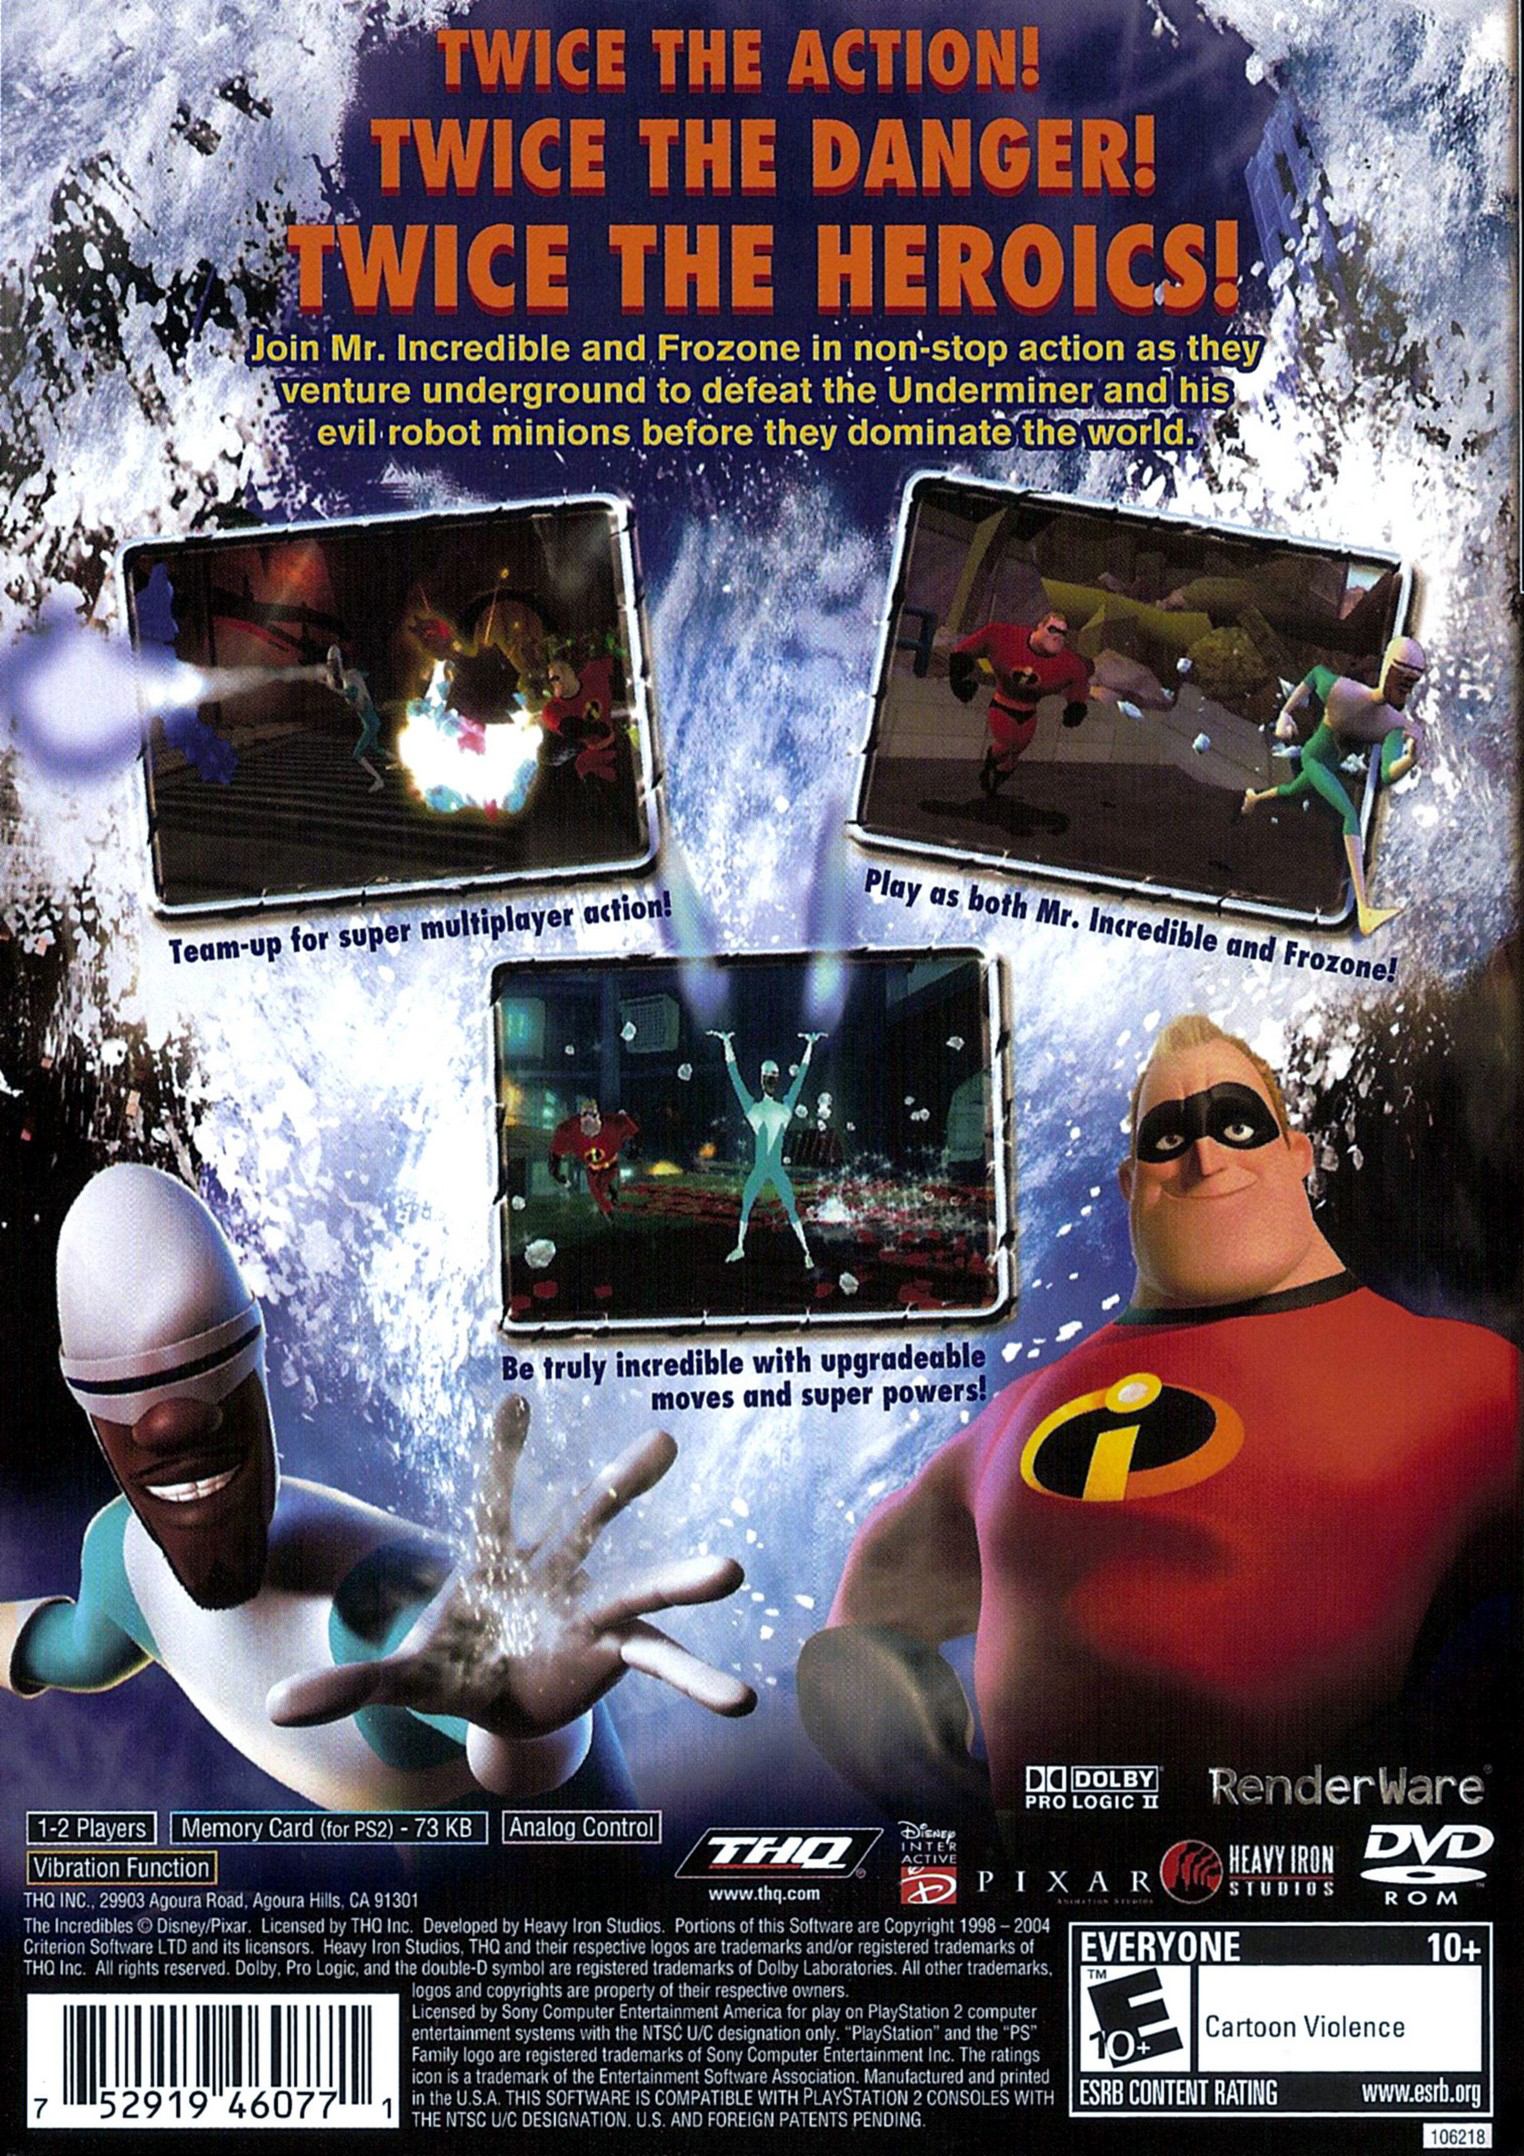 The Incredibles: Rise of the Underminer Picture